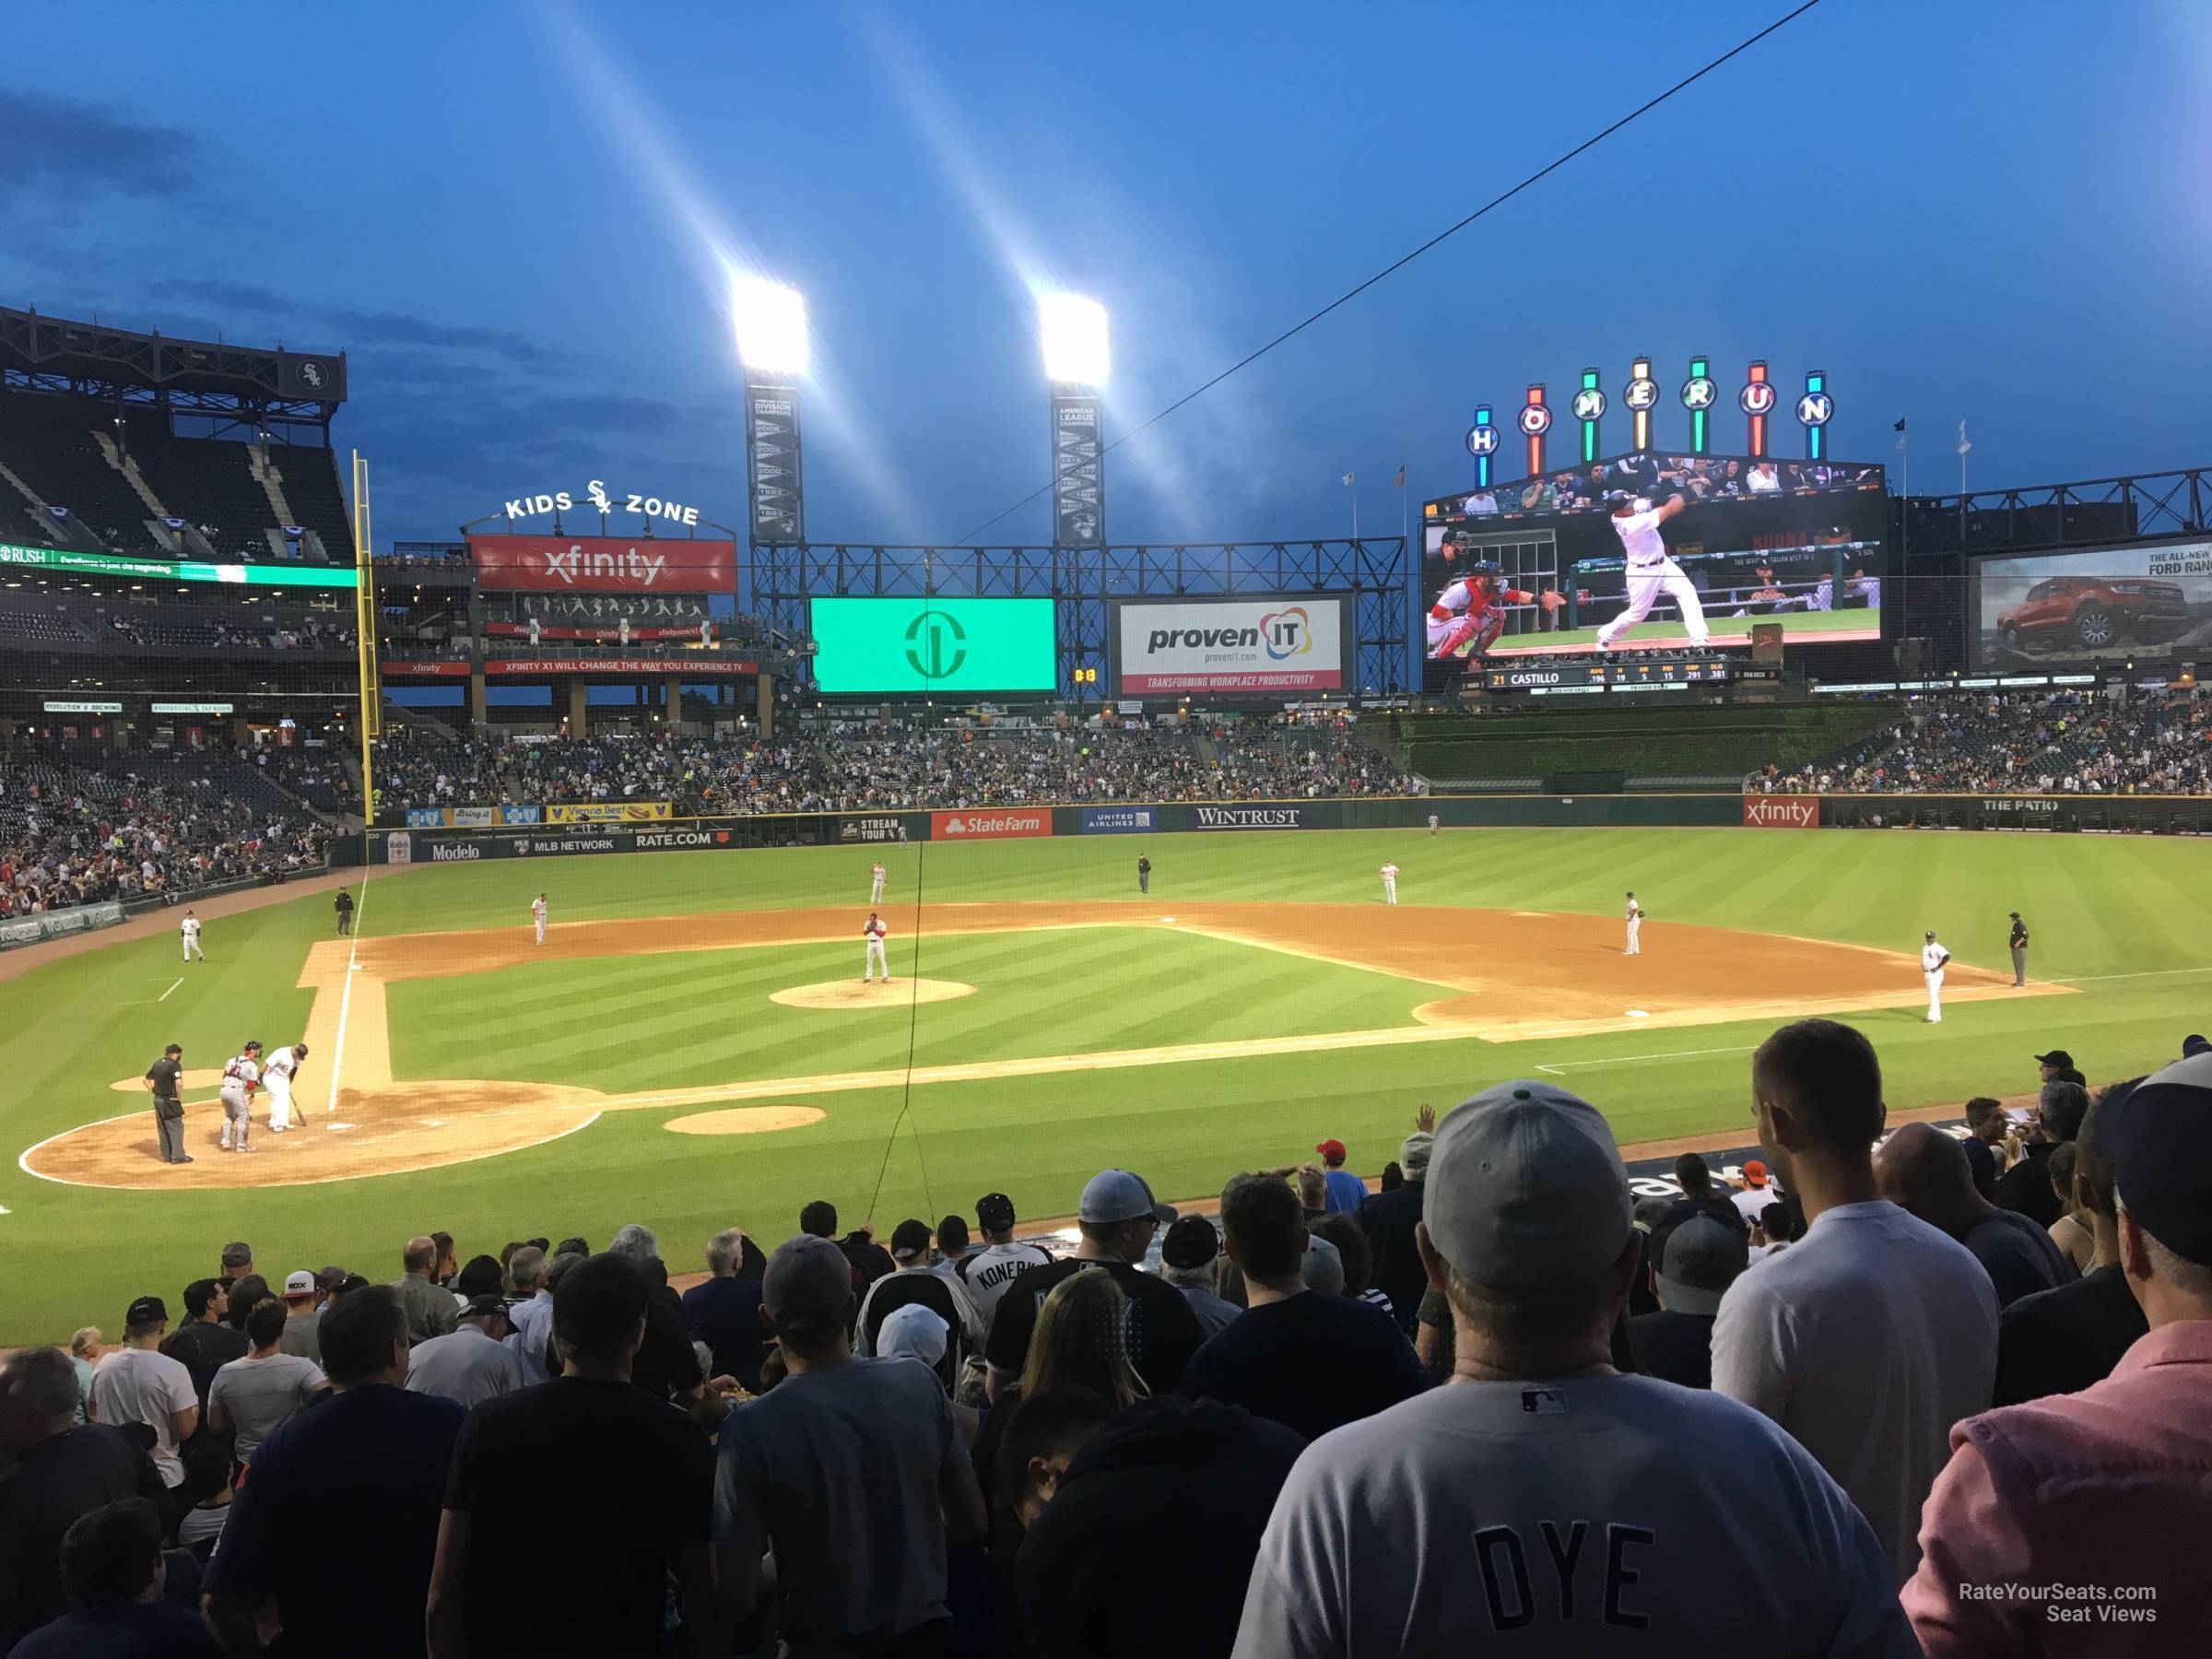 section 128, row 24 seat view  - guaranteed rate field